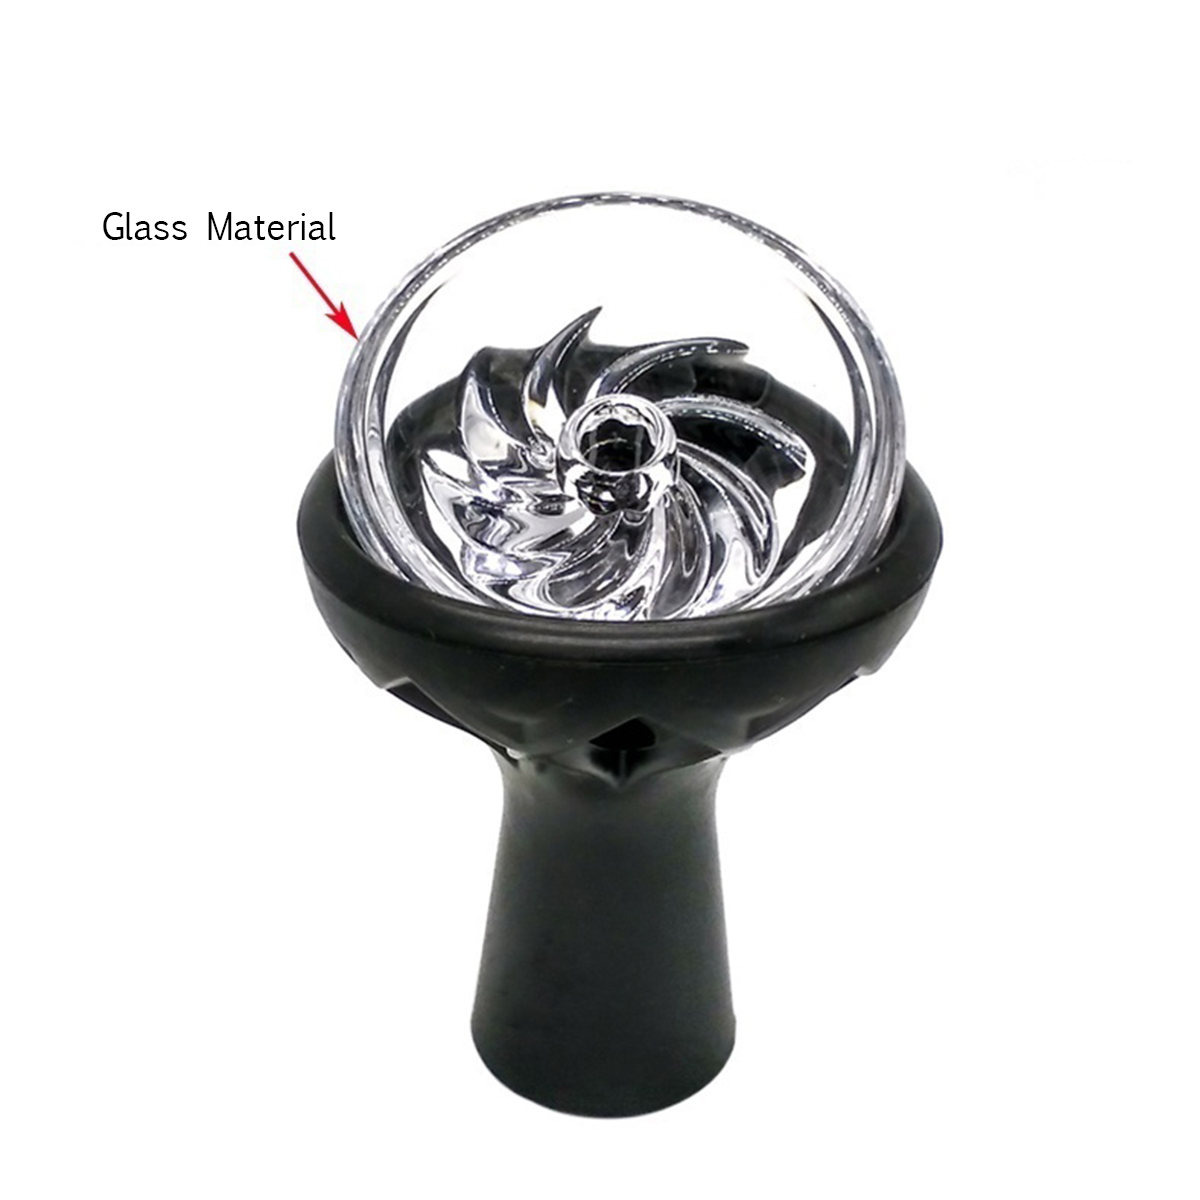 Carbon-Stove-Silica-Gel-Glass-Pot-Charcoal-Holder-Chicha-Straw-Accessories-1464230